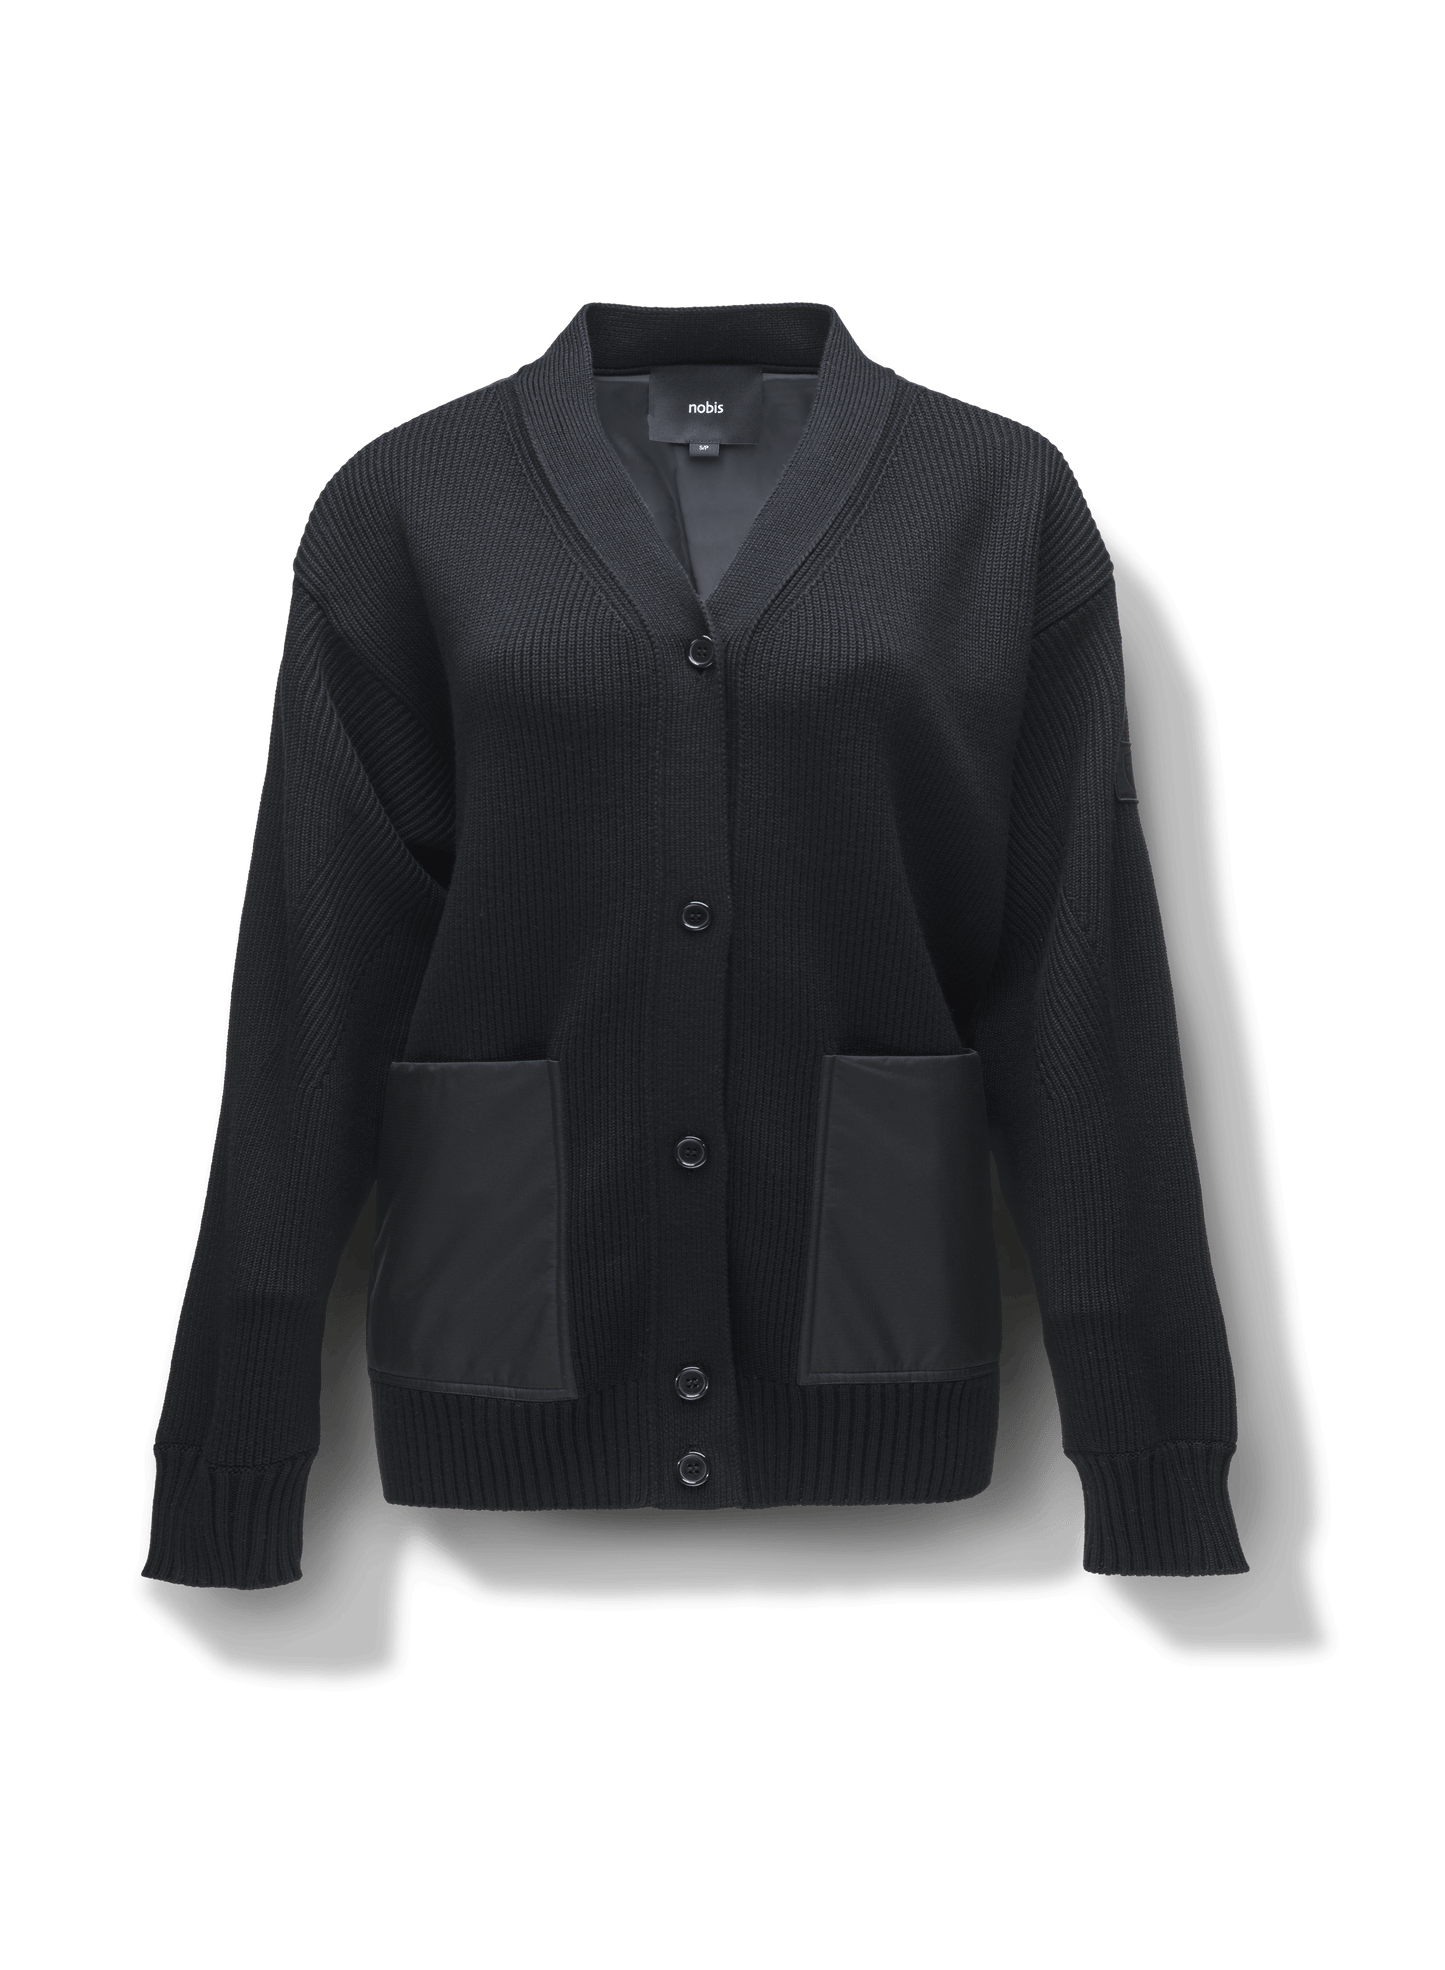 Riga Women's Tailored Button Front Cardigan in thigh length, premium virgin extra fine merino wool knit and stretch ripstop fabrication, Primaloft Gold Insulation Active+, button-front closure, quilted back detailing, front waist pockets, in Black